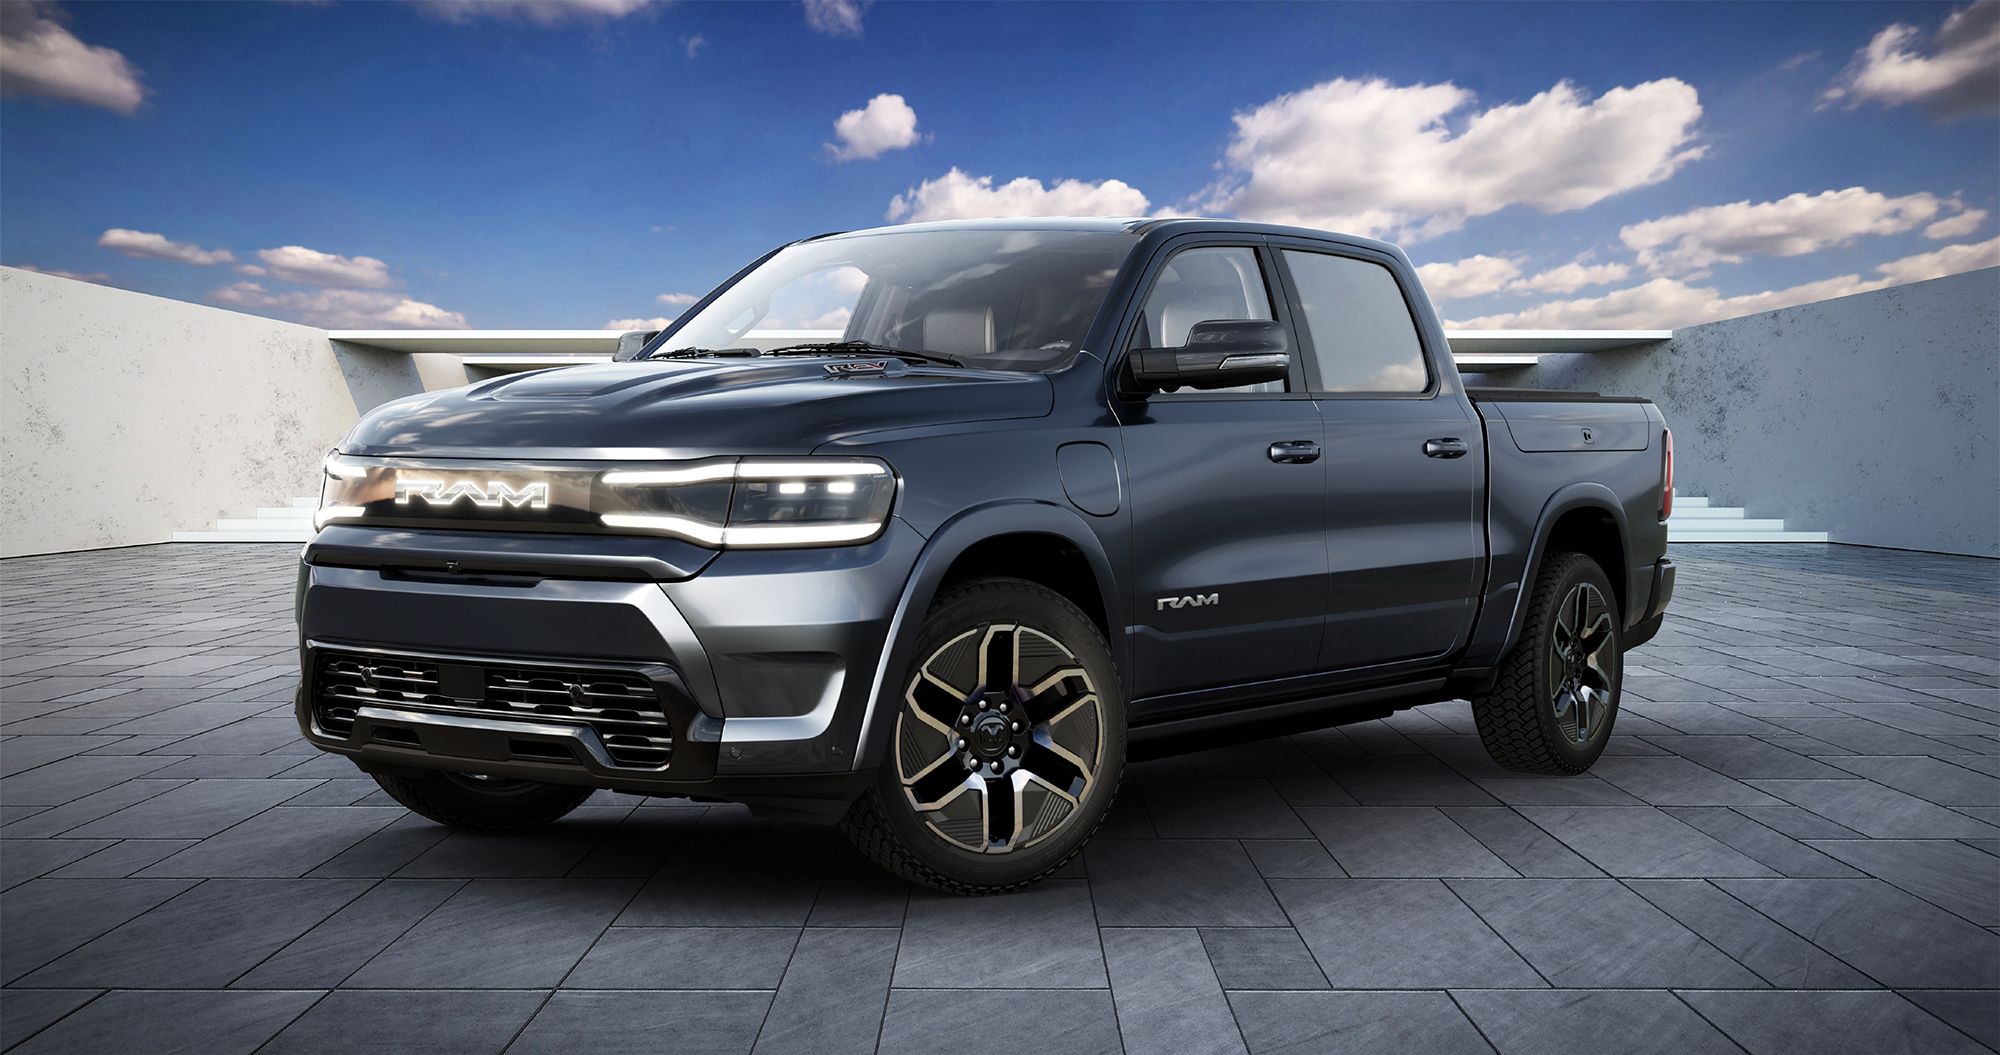 Ram electric pickup truck can go 500 miles on a charge, says Stellantis